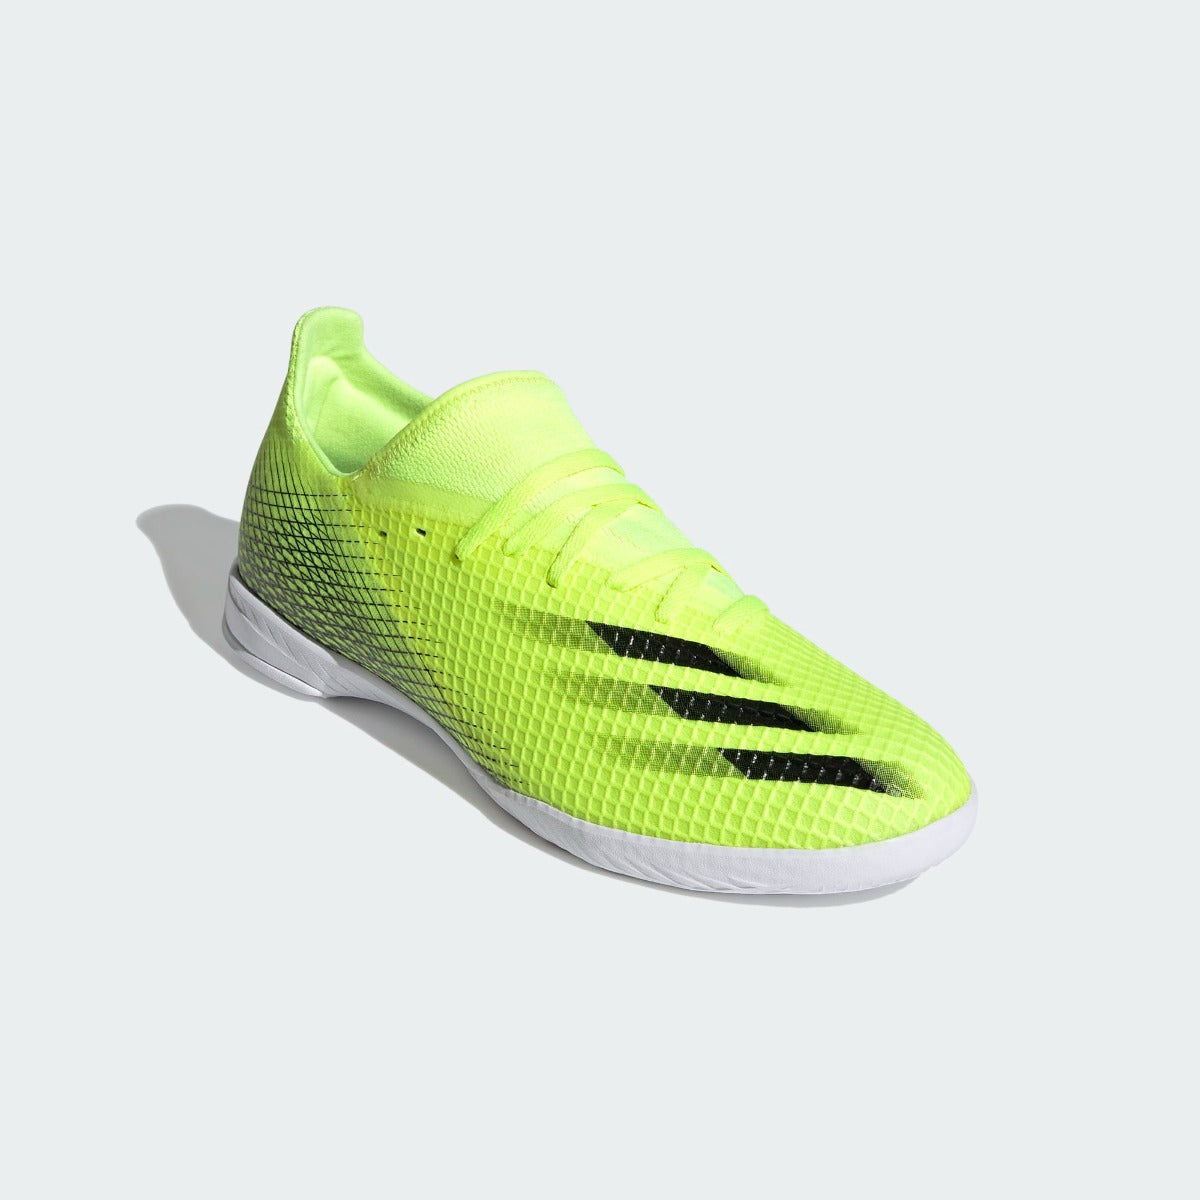 Adidas X Ghosted.3 IN - Volt-Black